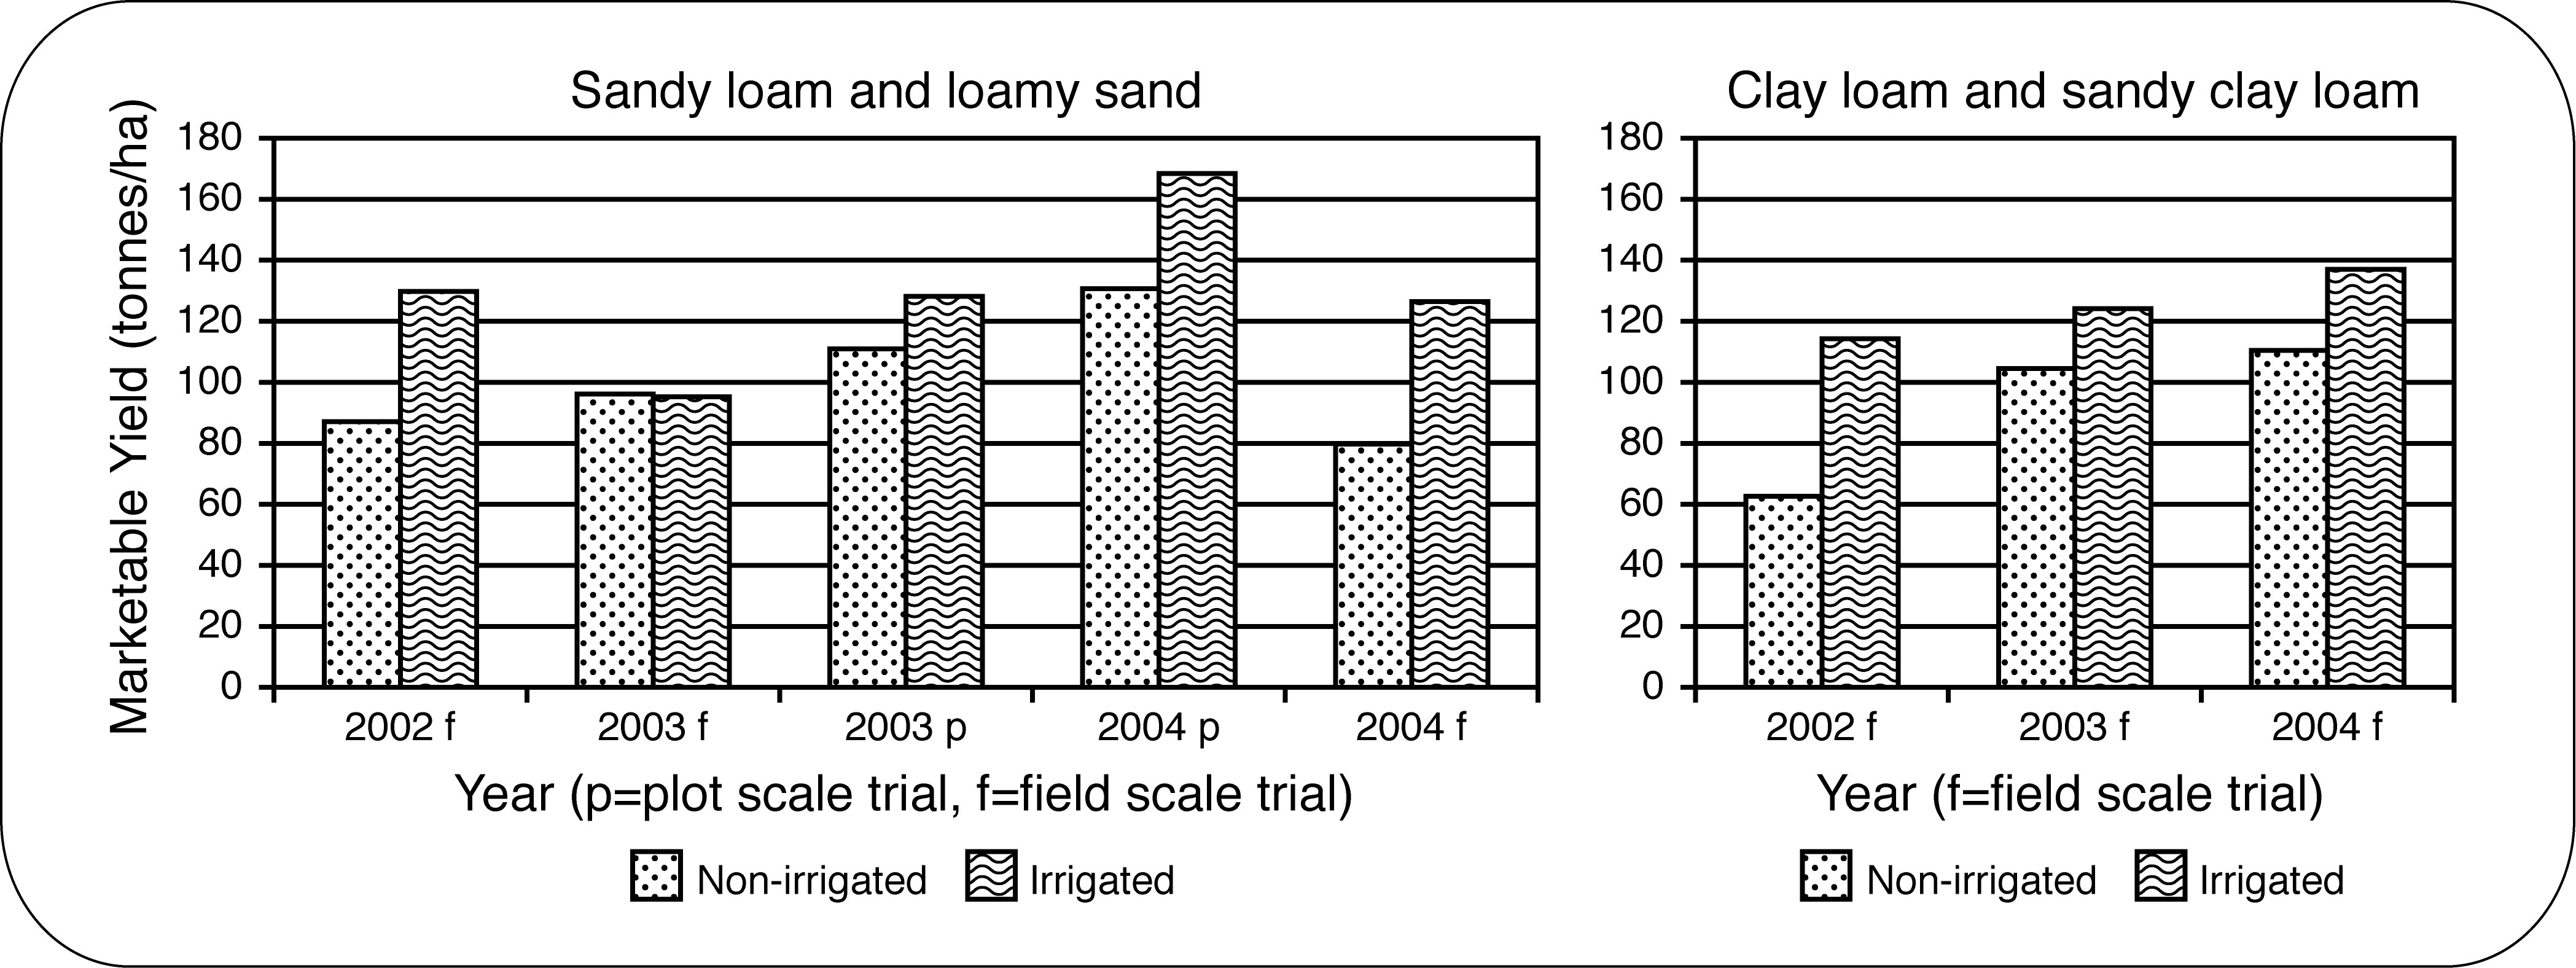 Processing tomato yield response graph to irrigation on sandy loam, loamy sand, clay loam and sandy clay loam soils from 2002 to 2004